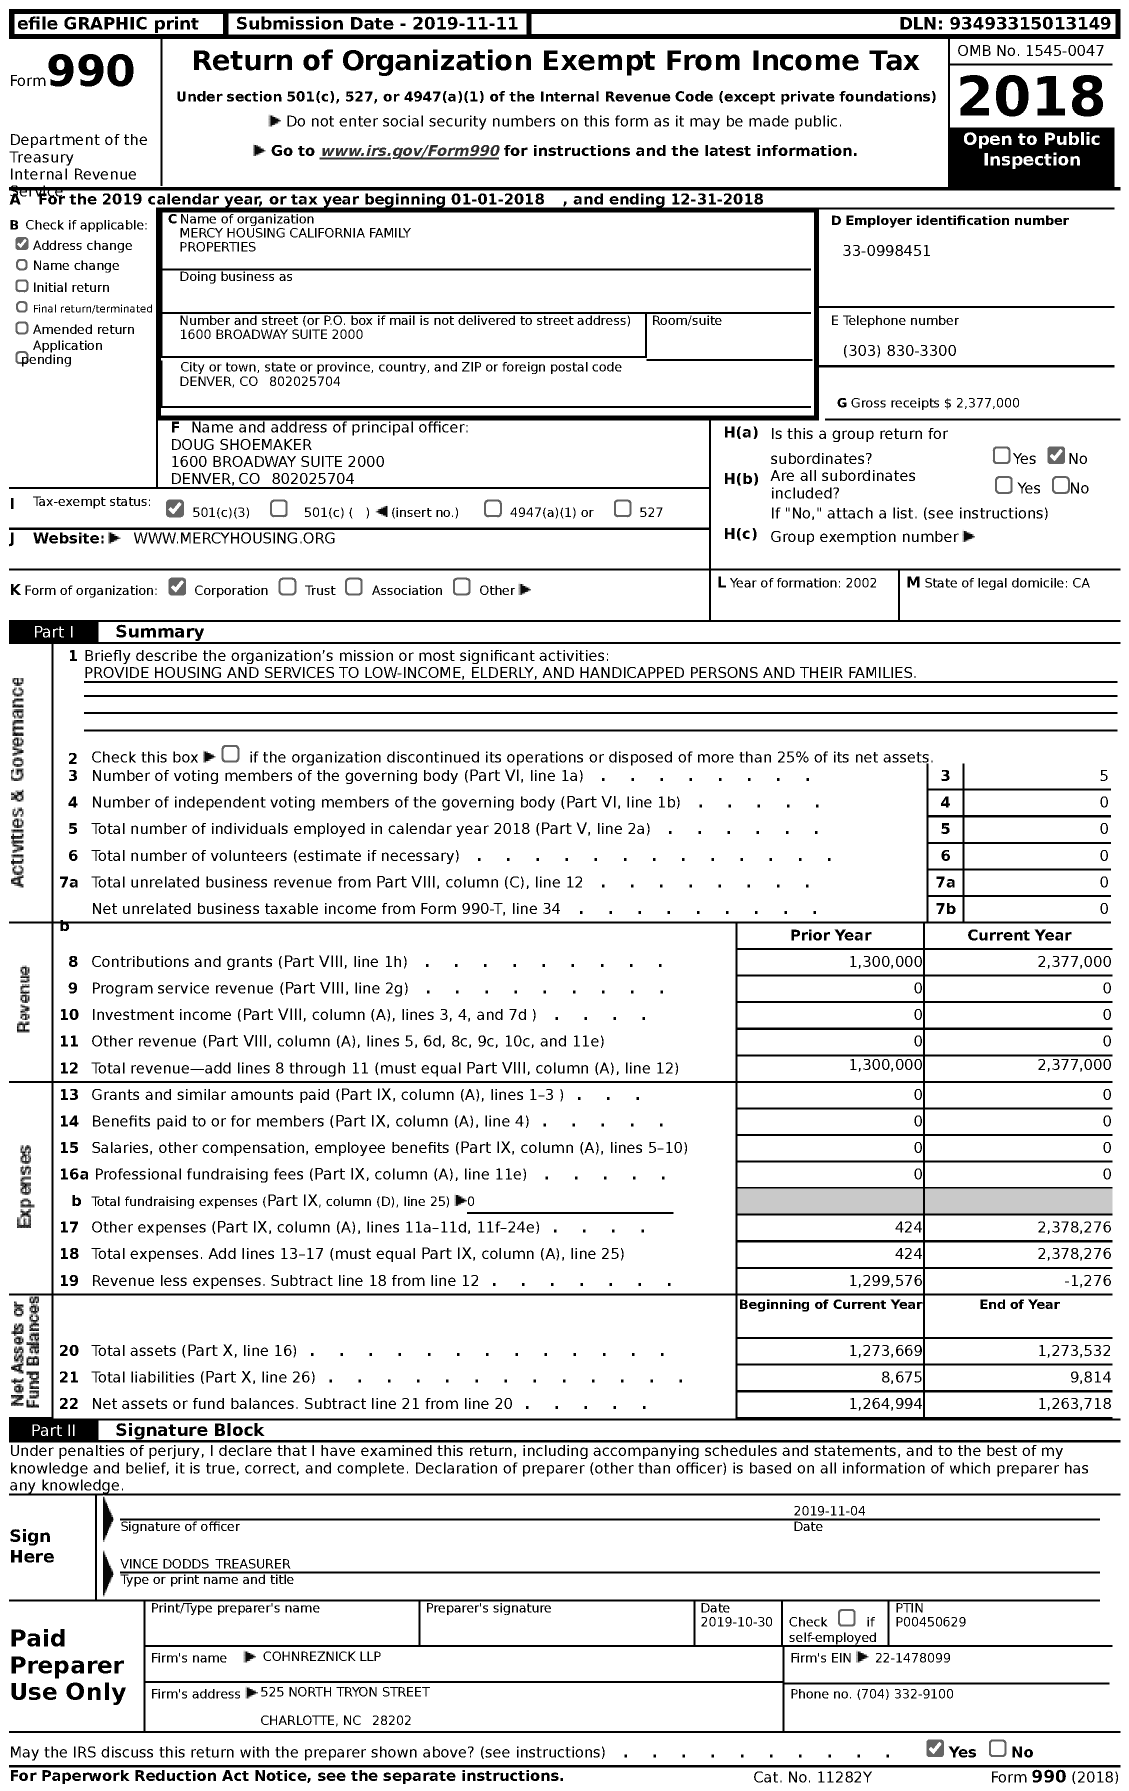 Image of first page of 2018 Form 990 for Mercy Housing California Family Properties